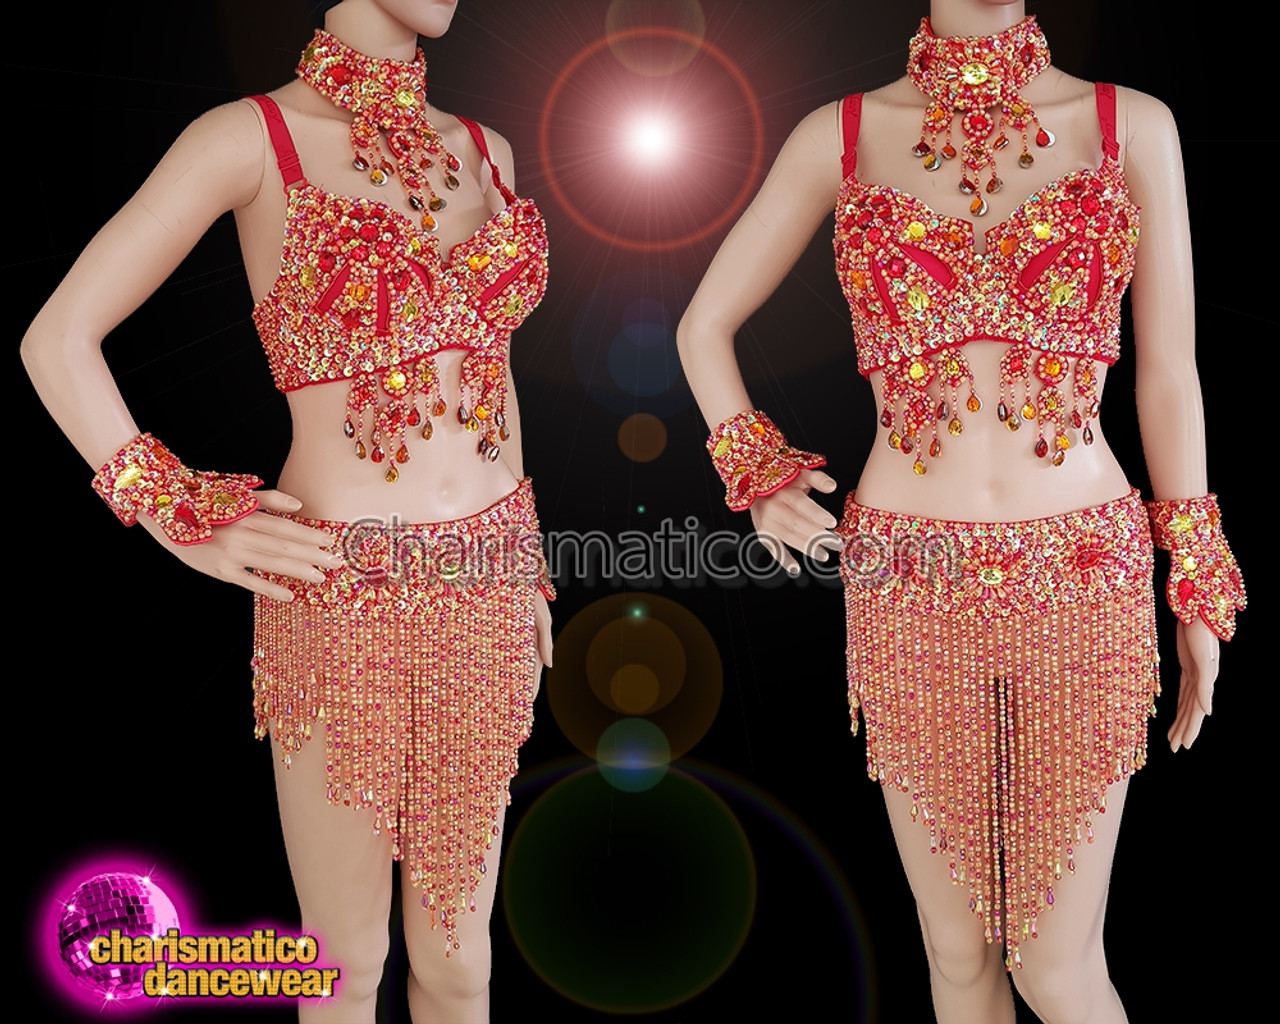 Aesthetically Pleasing Belly Dancing Costume In Orange And Red Sequin Work